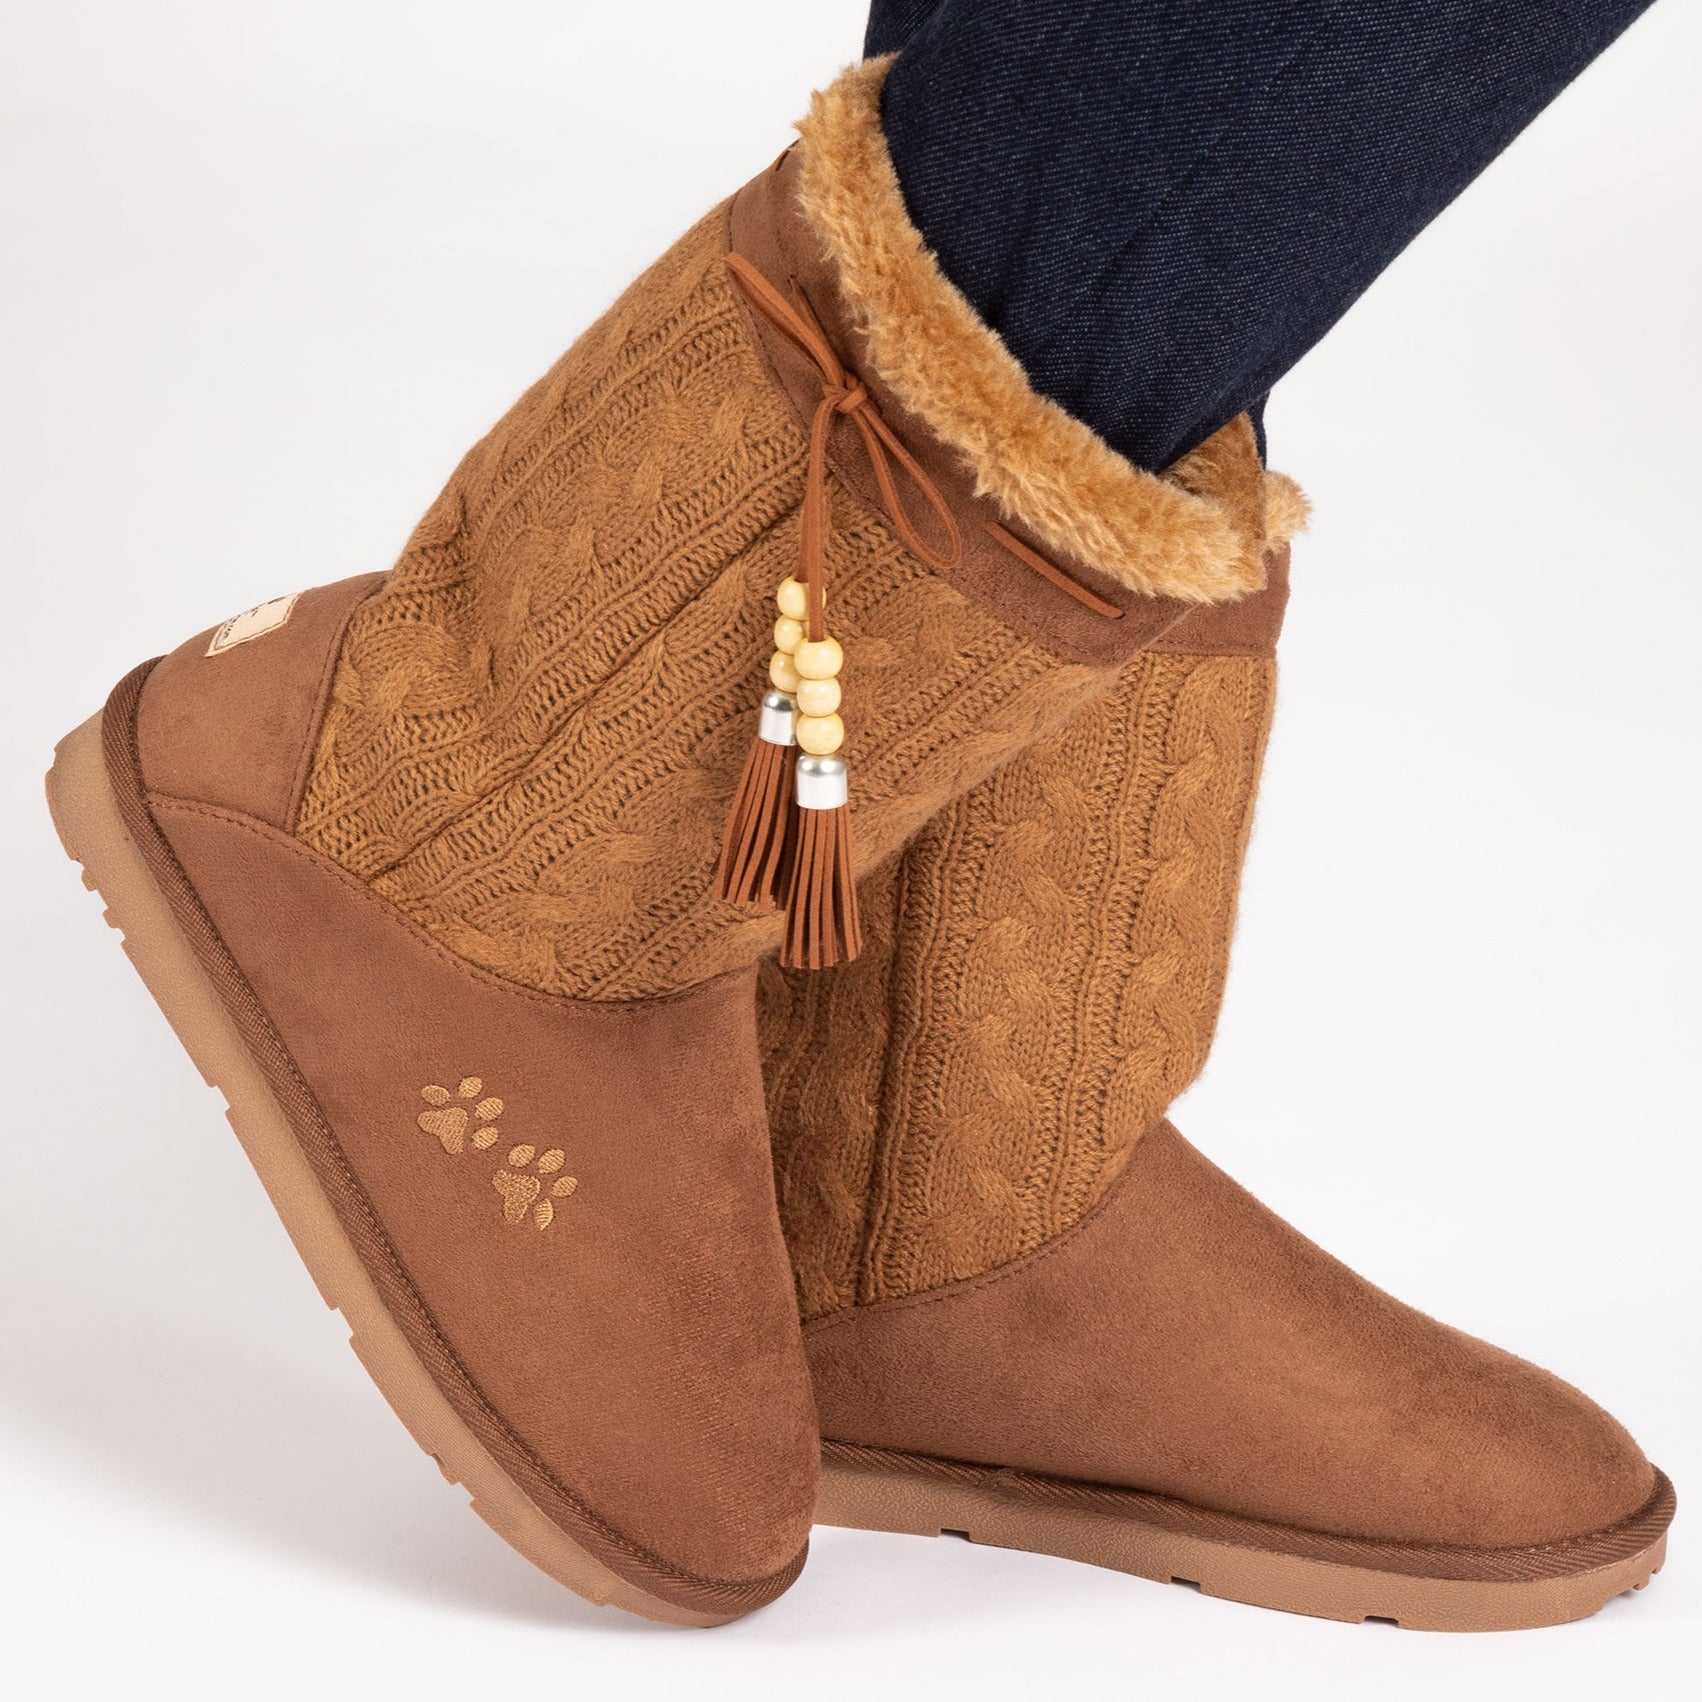 Paw Print Tall Knitted Boots With Beaded Tassels - Tan - 6